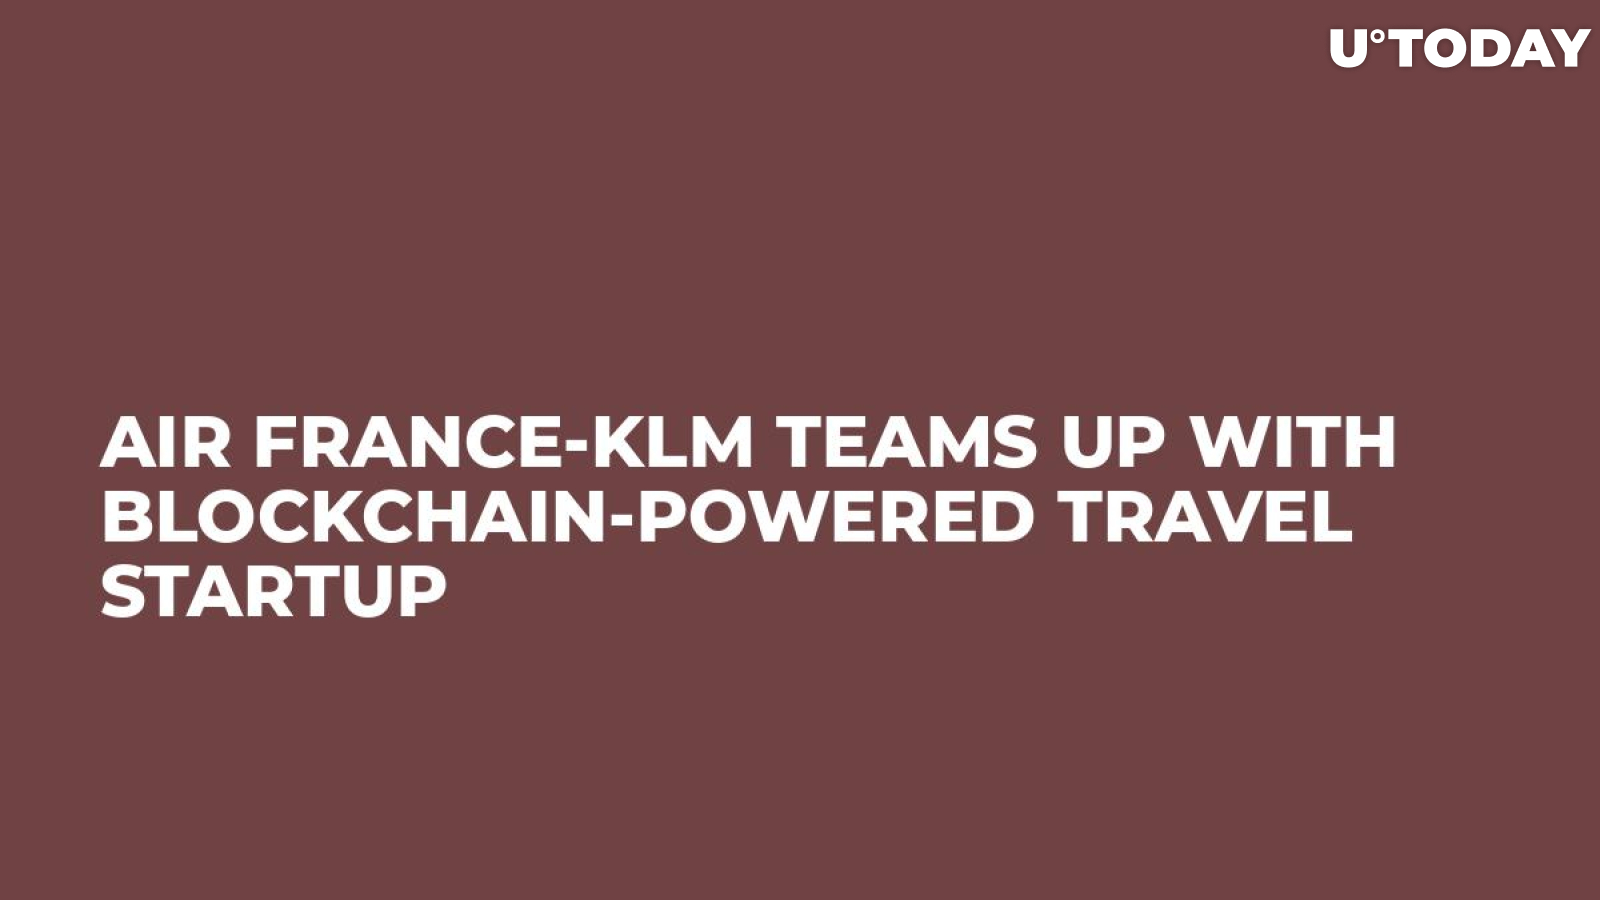 Air France-KLM Teams Up With Blockchain-Powered Travel Startup 